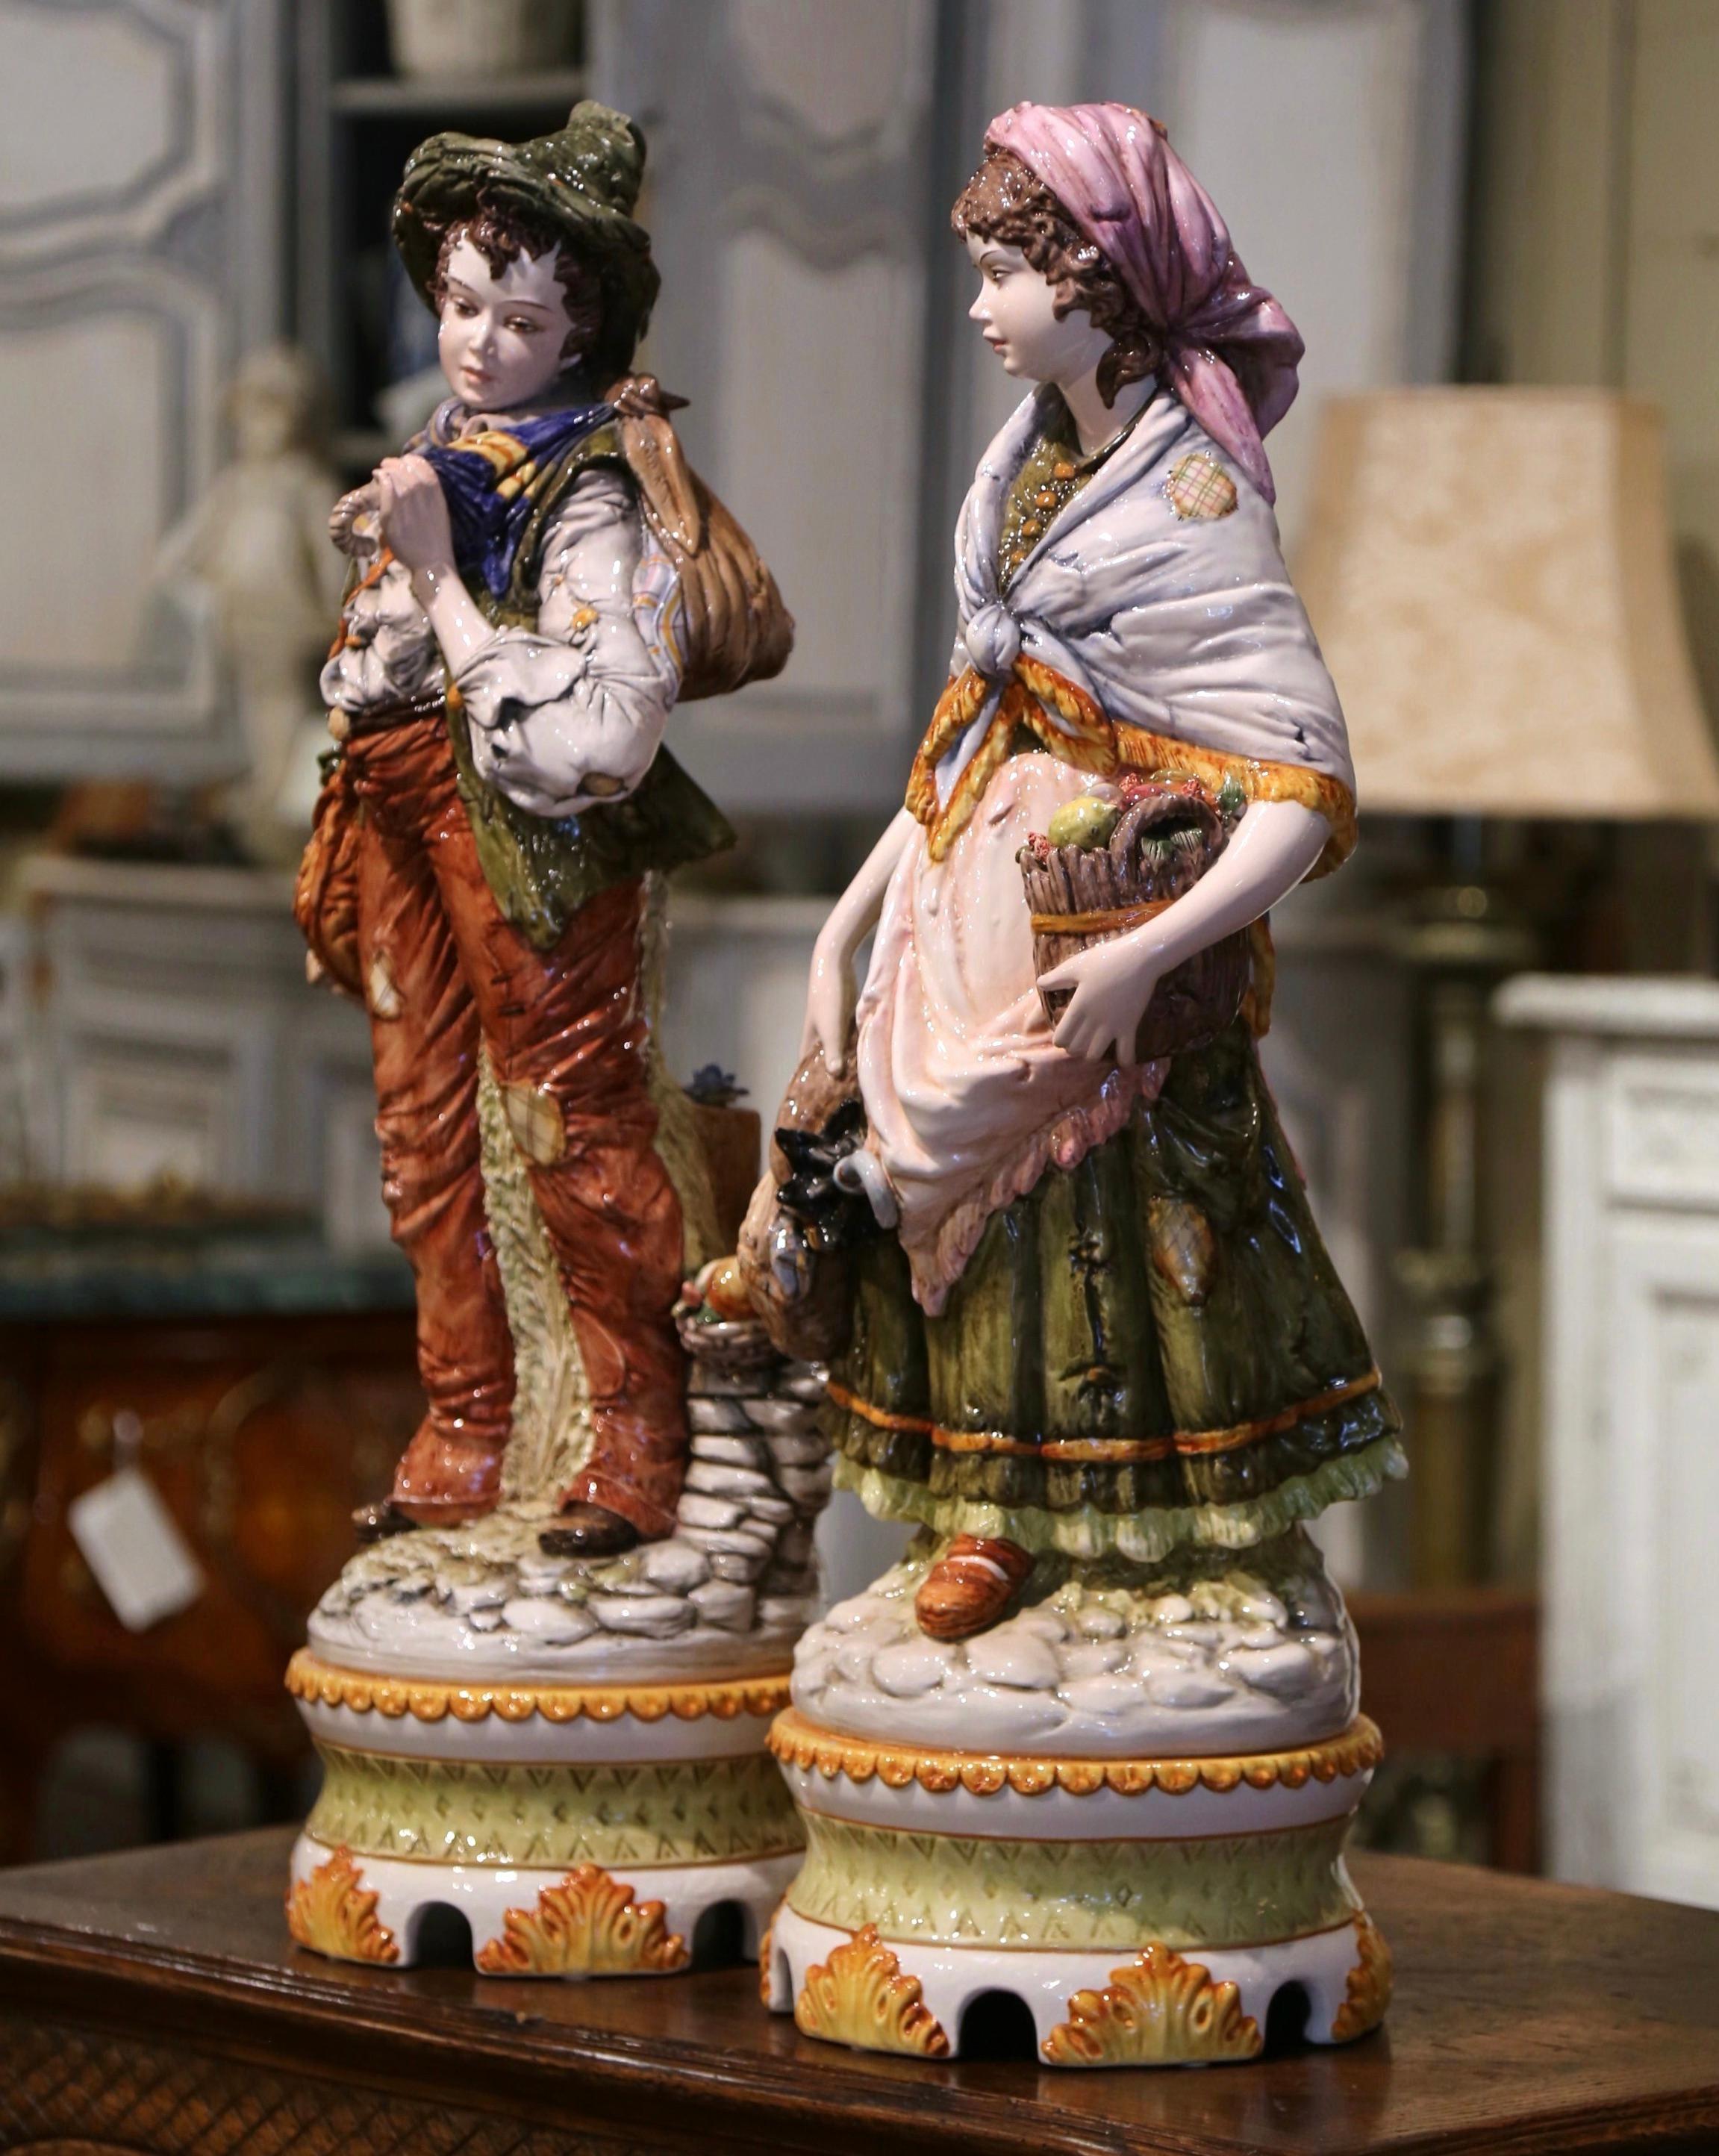 This beautiful pair of majolica figurines would elevate any living room, kitchen, or entry way. Created in Italy circa 1950 and done in the Capodimonte style, the large barbotine statues depict a couple of young adults in traditional Italian